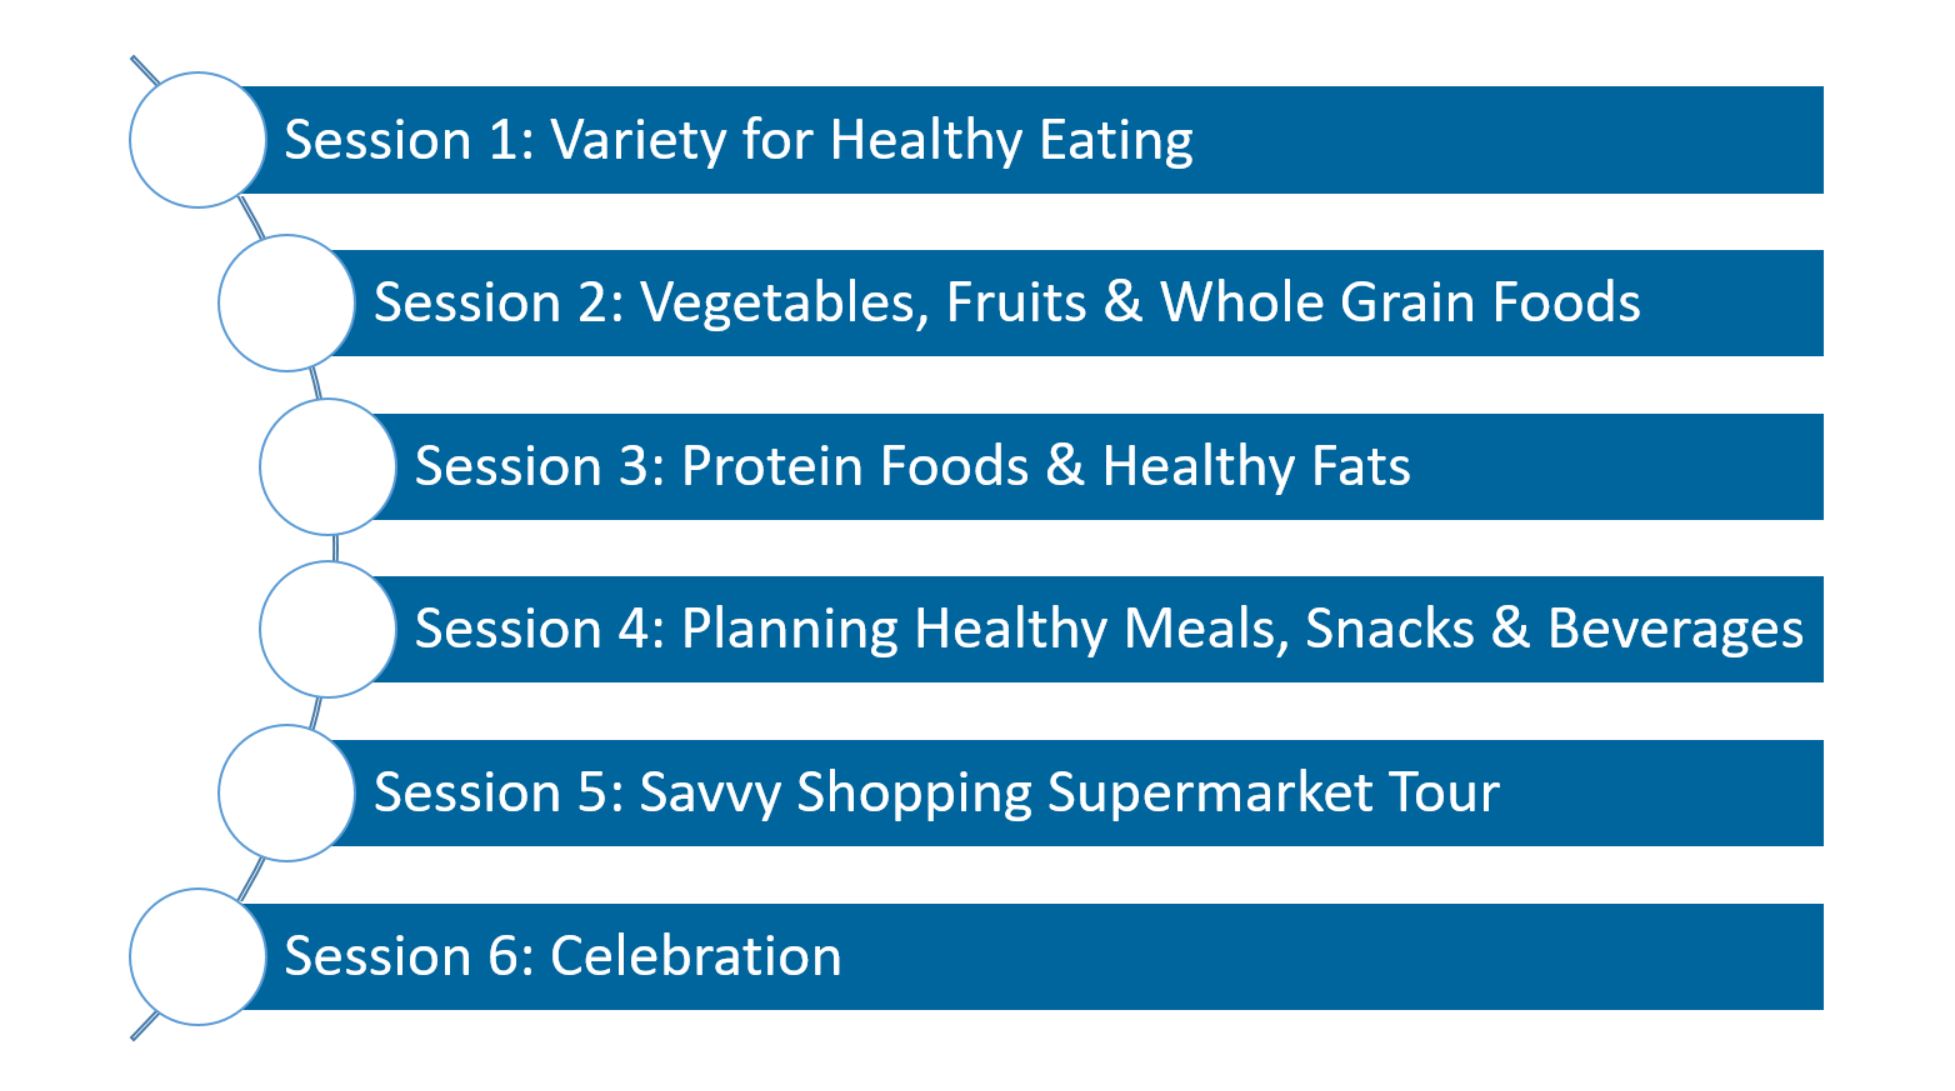 Healthy eating; Vegetables, fruits & whole grains; Protein & fats; Planning meals snacks & beverages; Shopping tour; Celebration